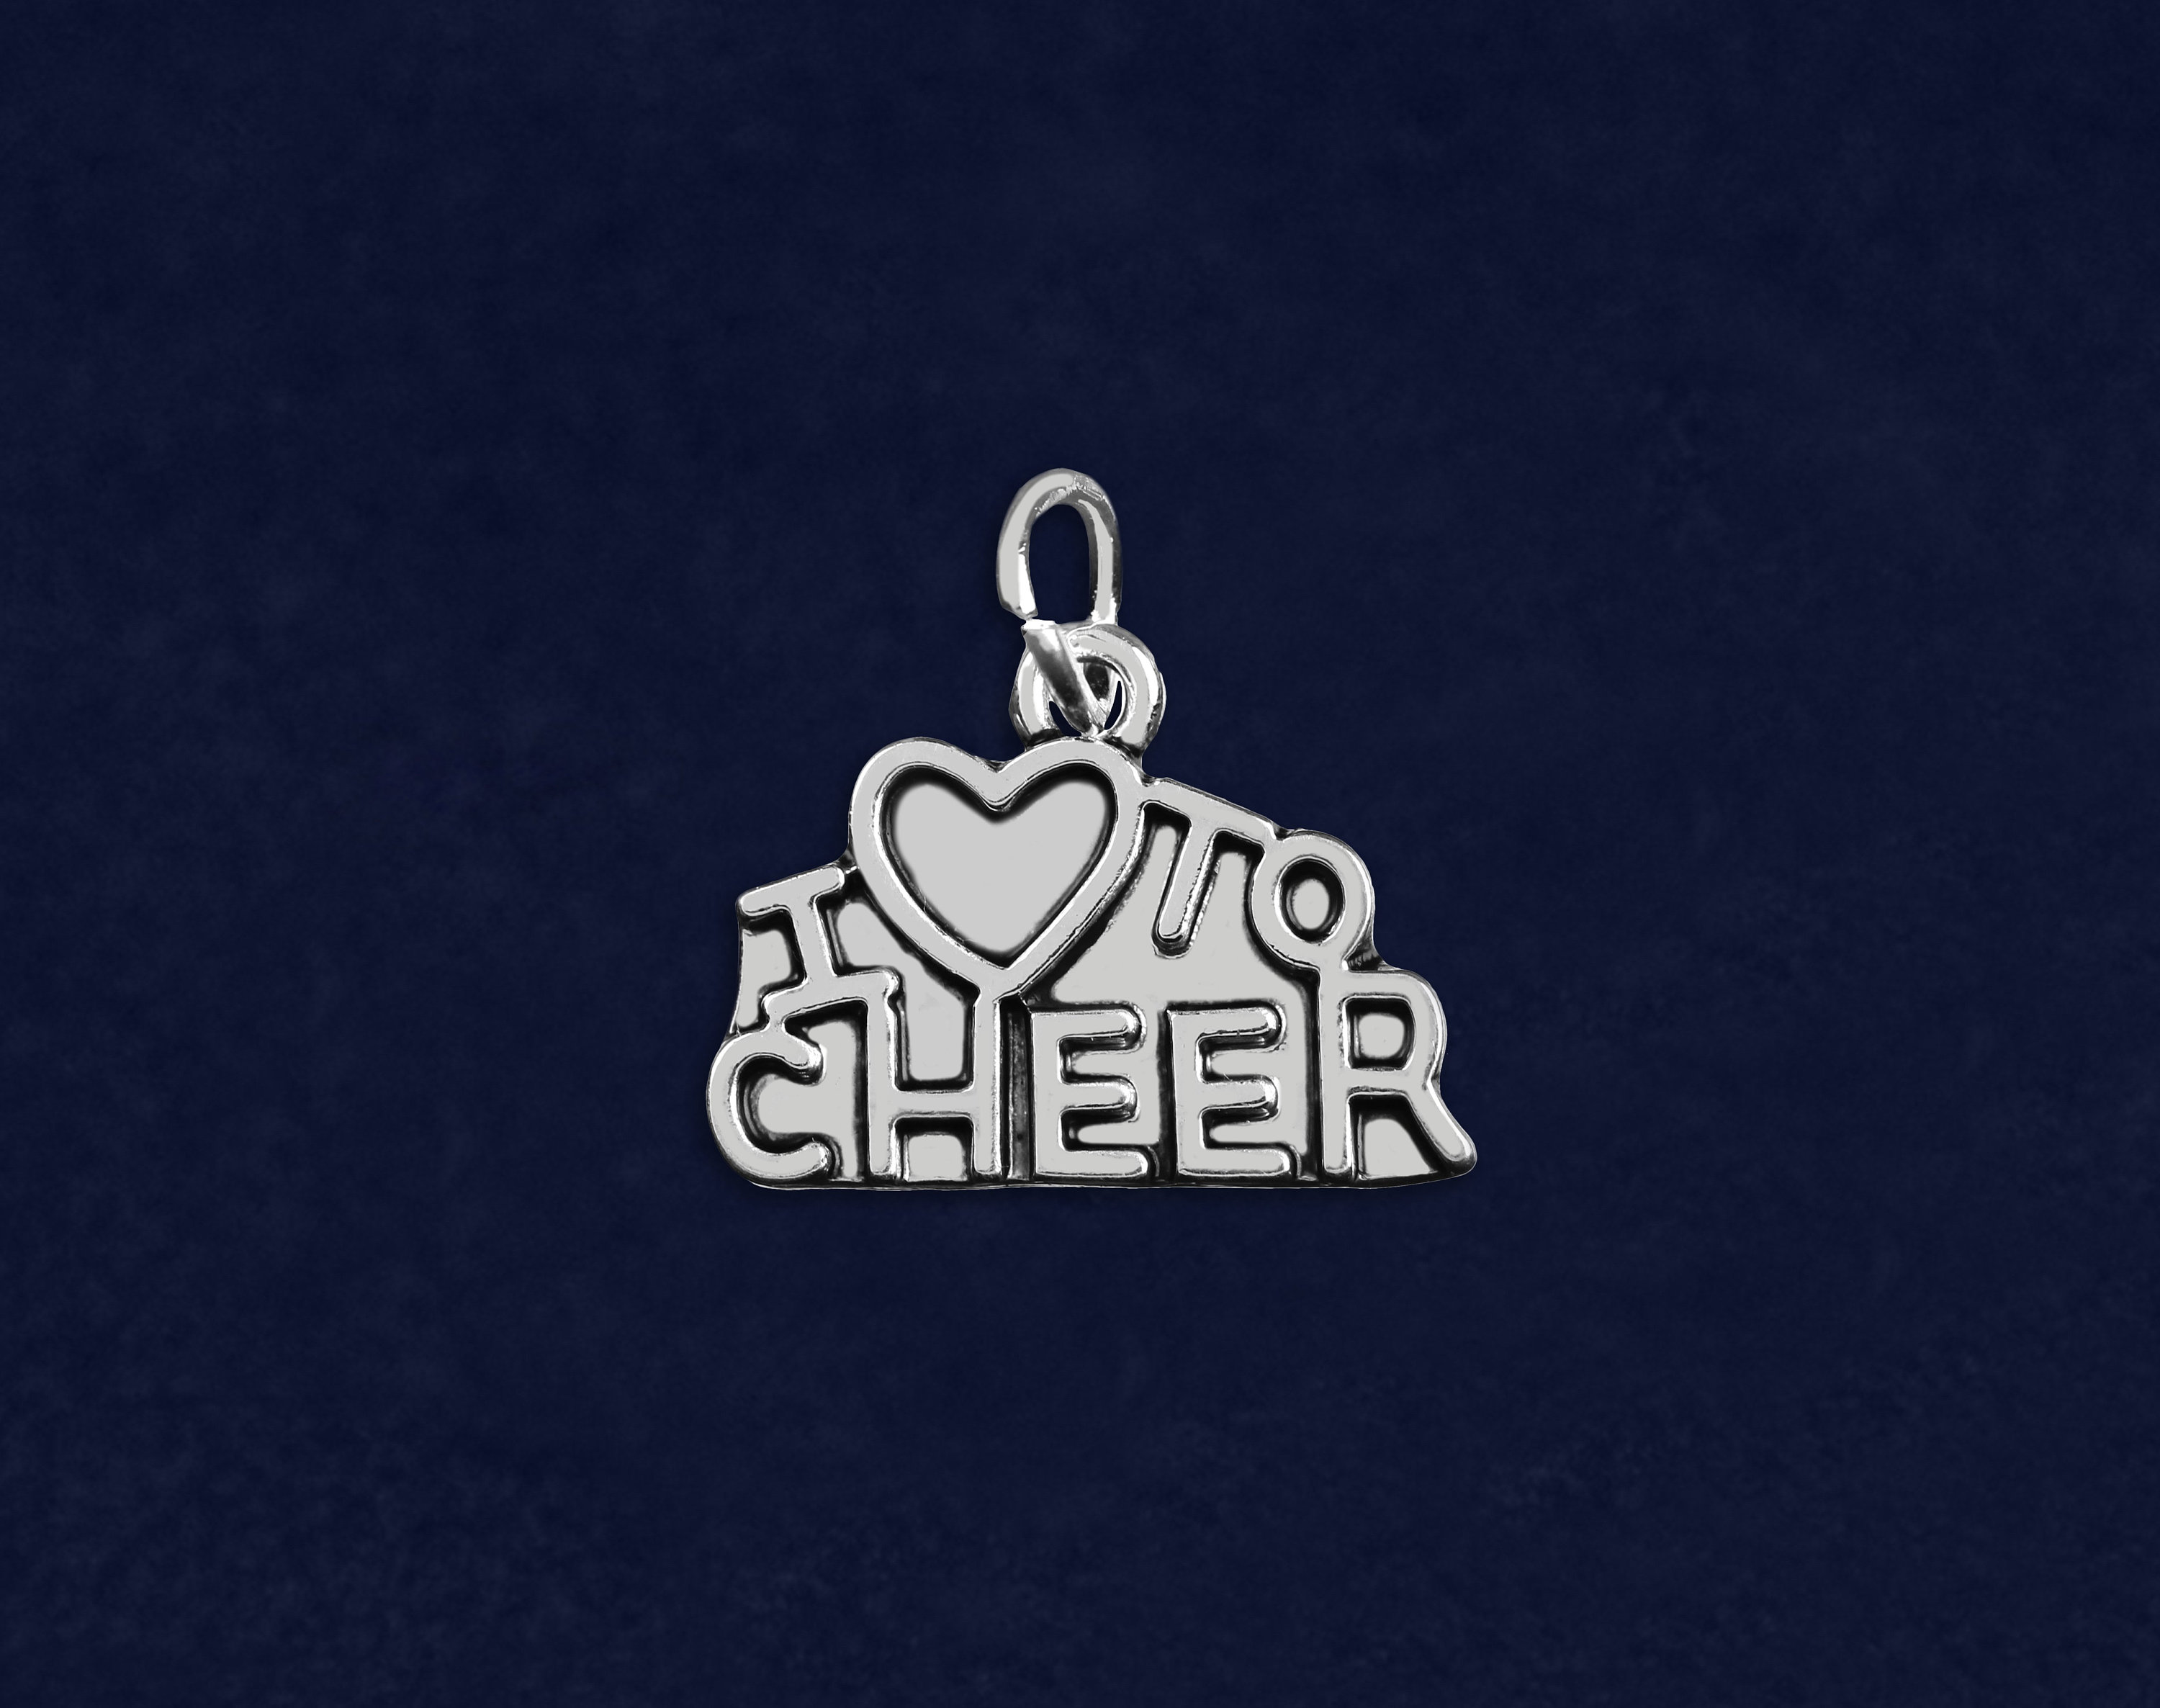 50pcs Cheer Charms I Love To Cheer Charm Antique Silver Tone 14x10mm cf1823